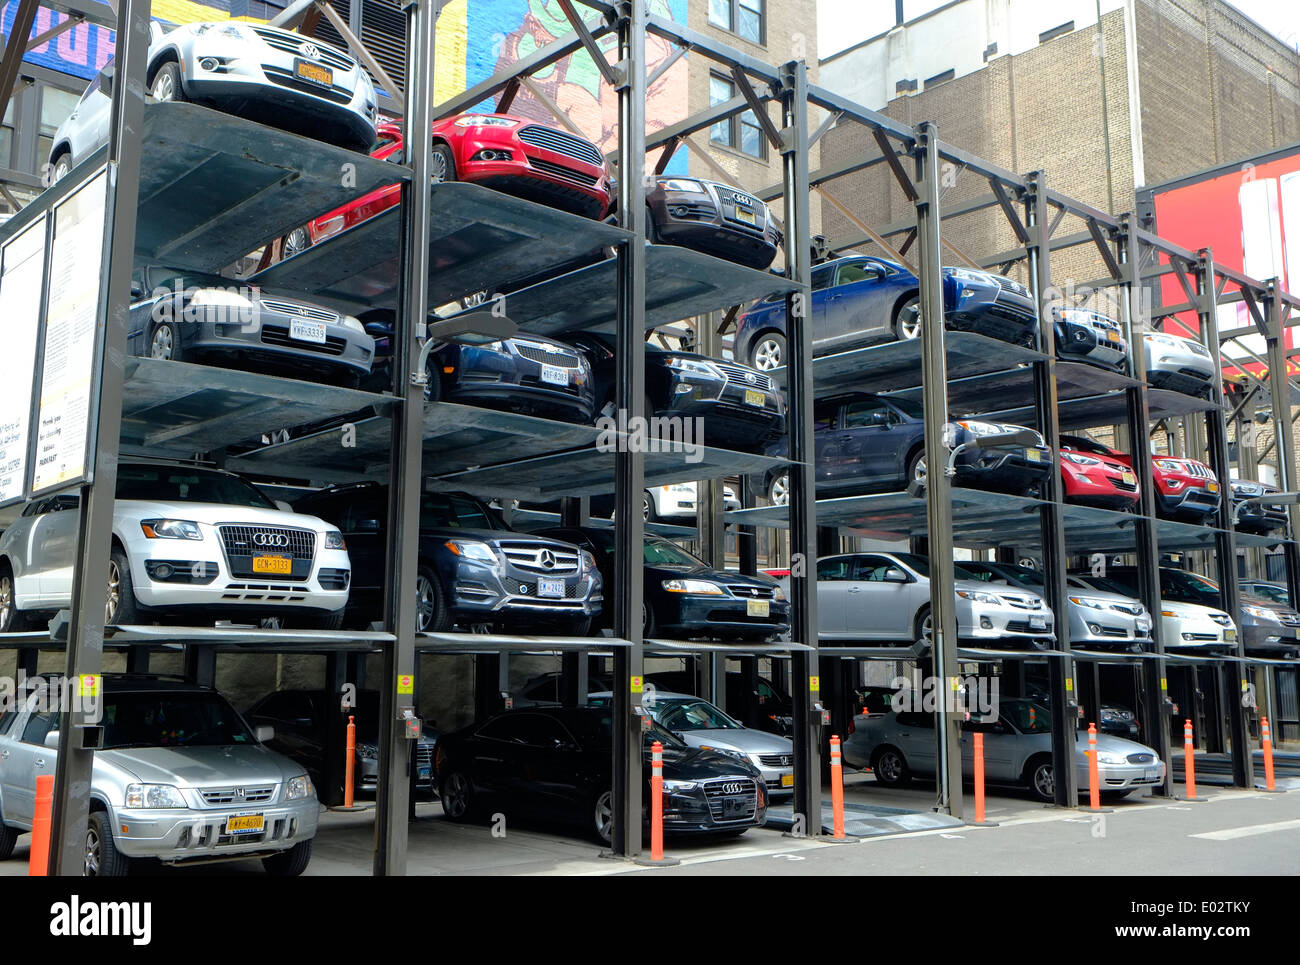 Inner city parking solutions, Midtown, New York, USA Stock Photo